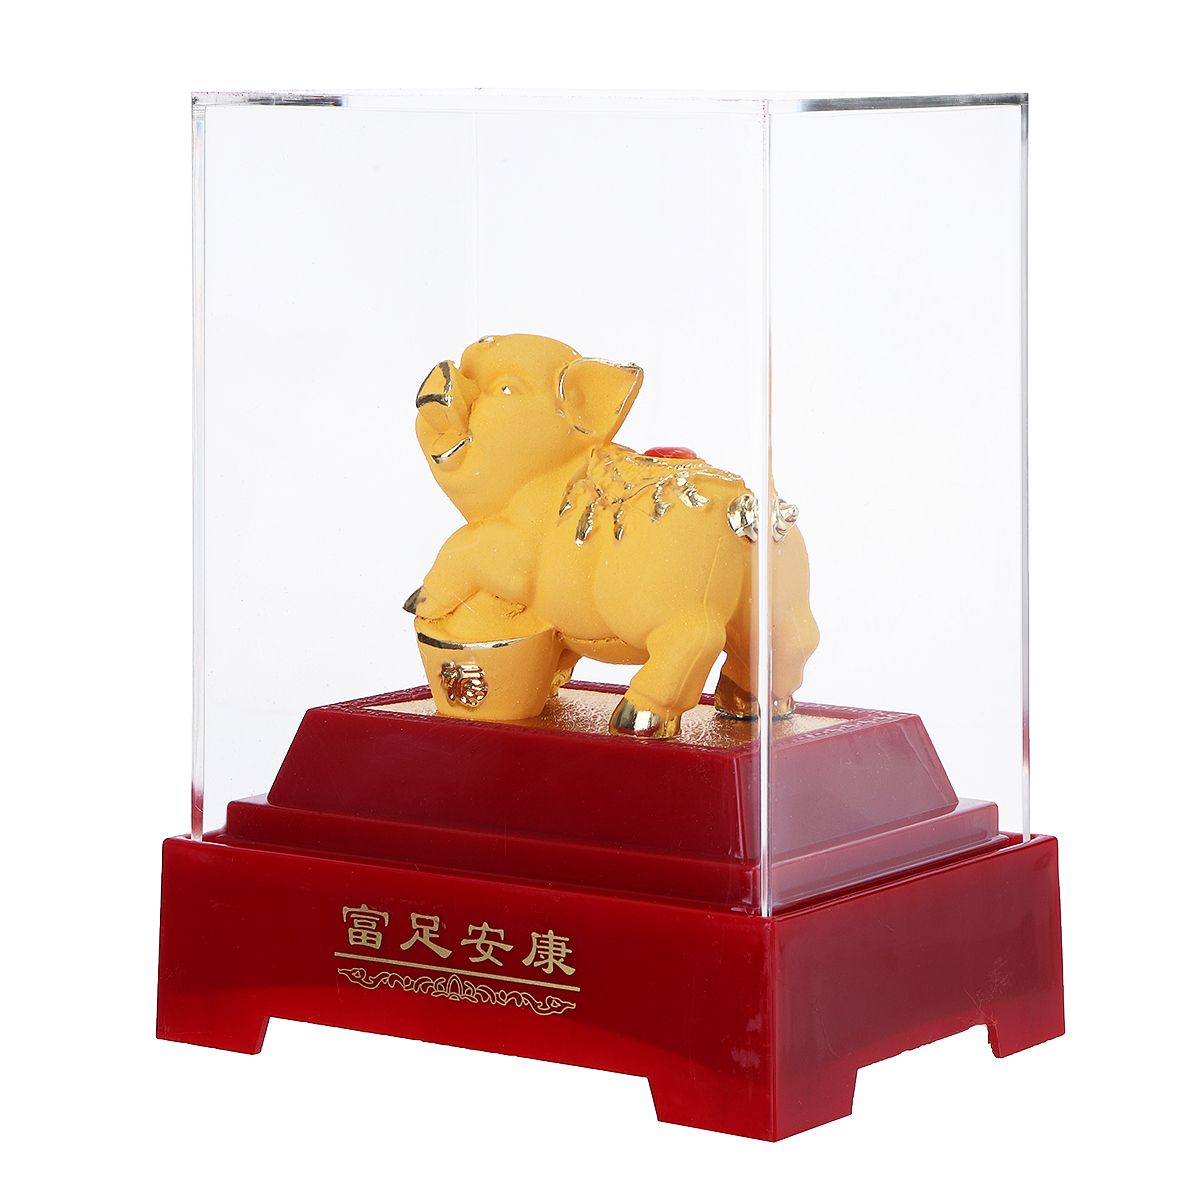 2019-Chinese-Zodiac-Gold-Pig-Money-Wealth-Statue-Office-Home-Decorations-Ornament-Gift-1515810